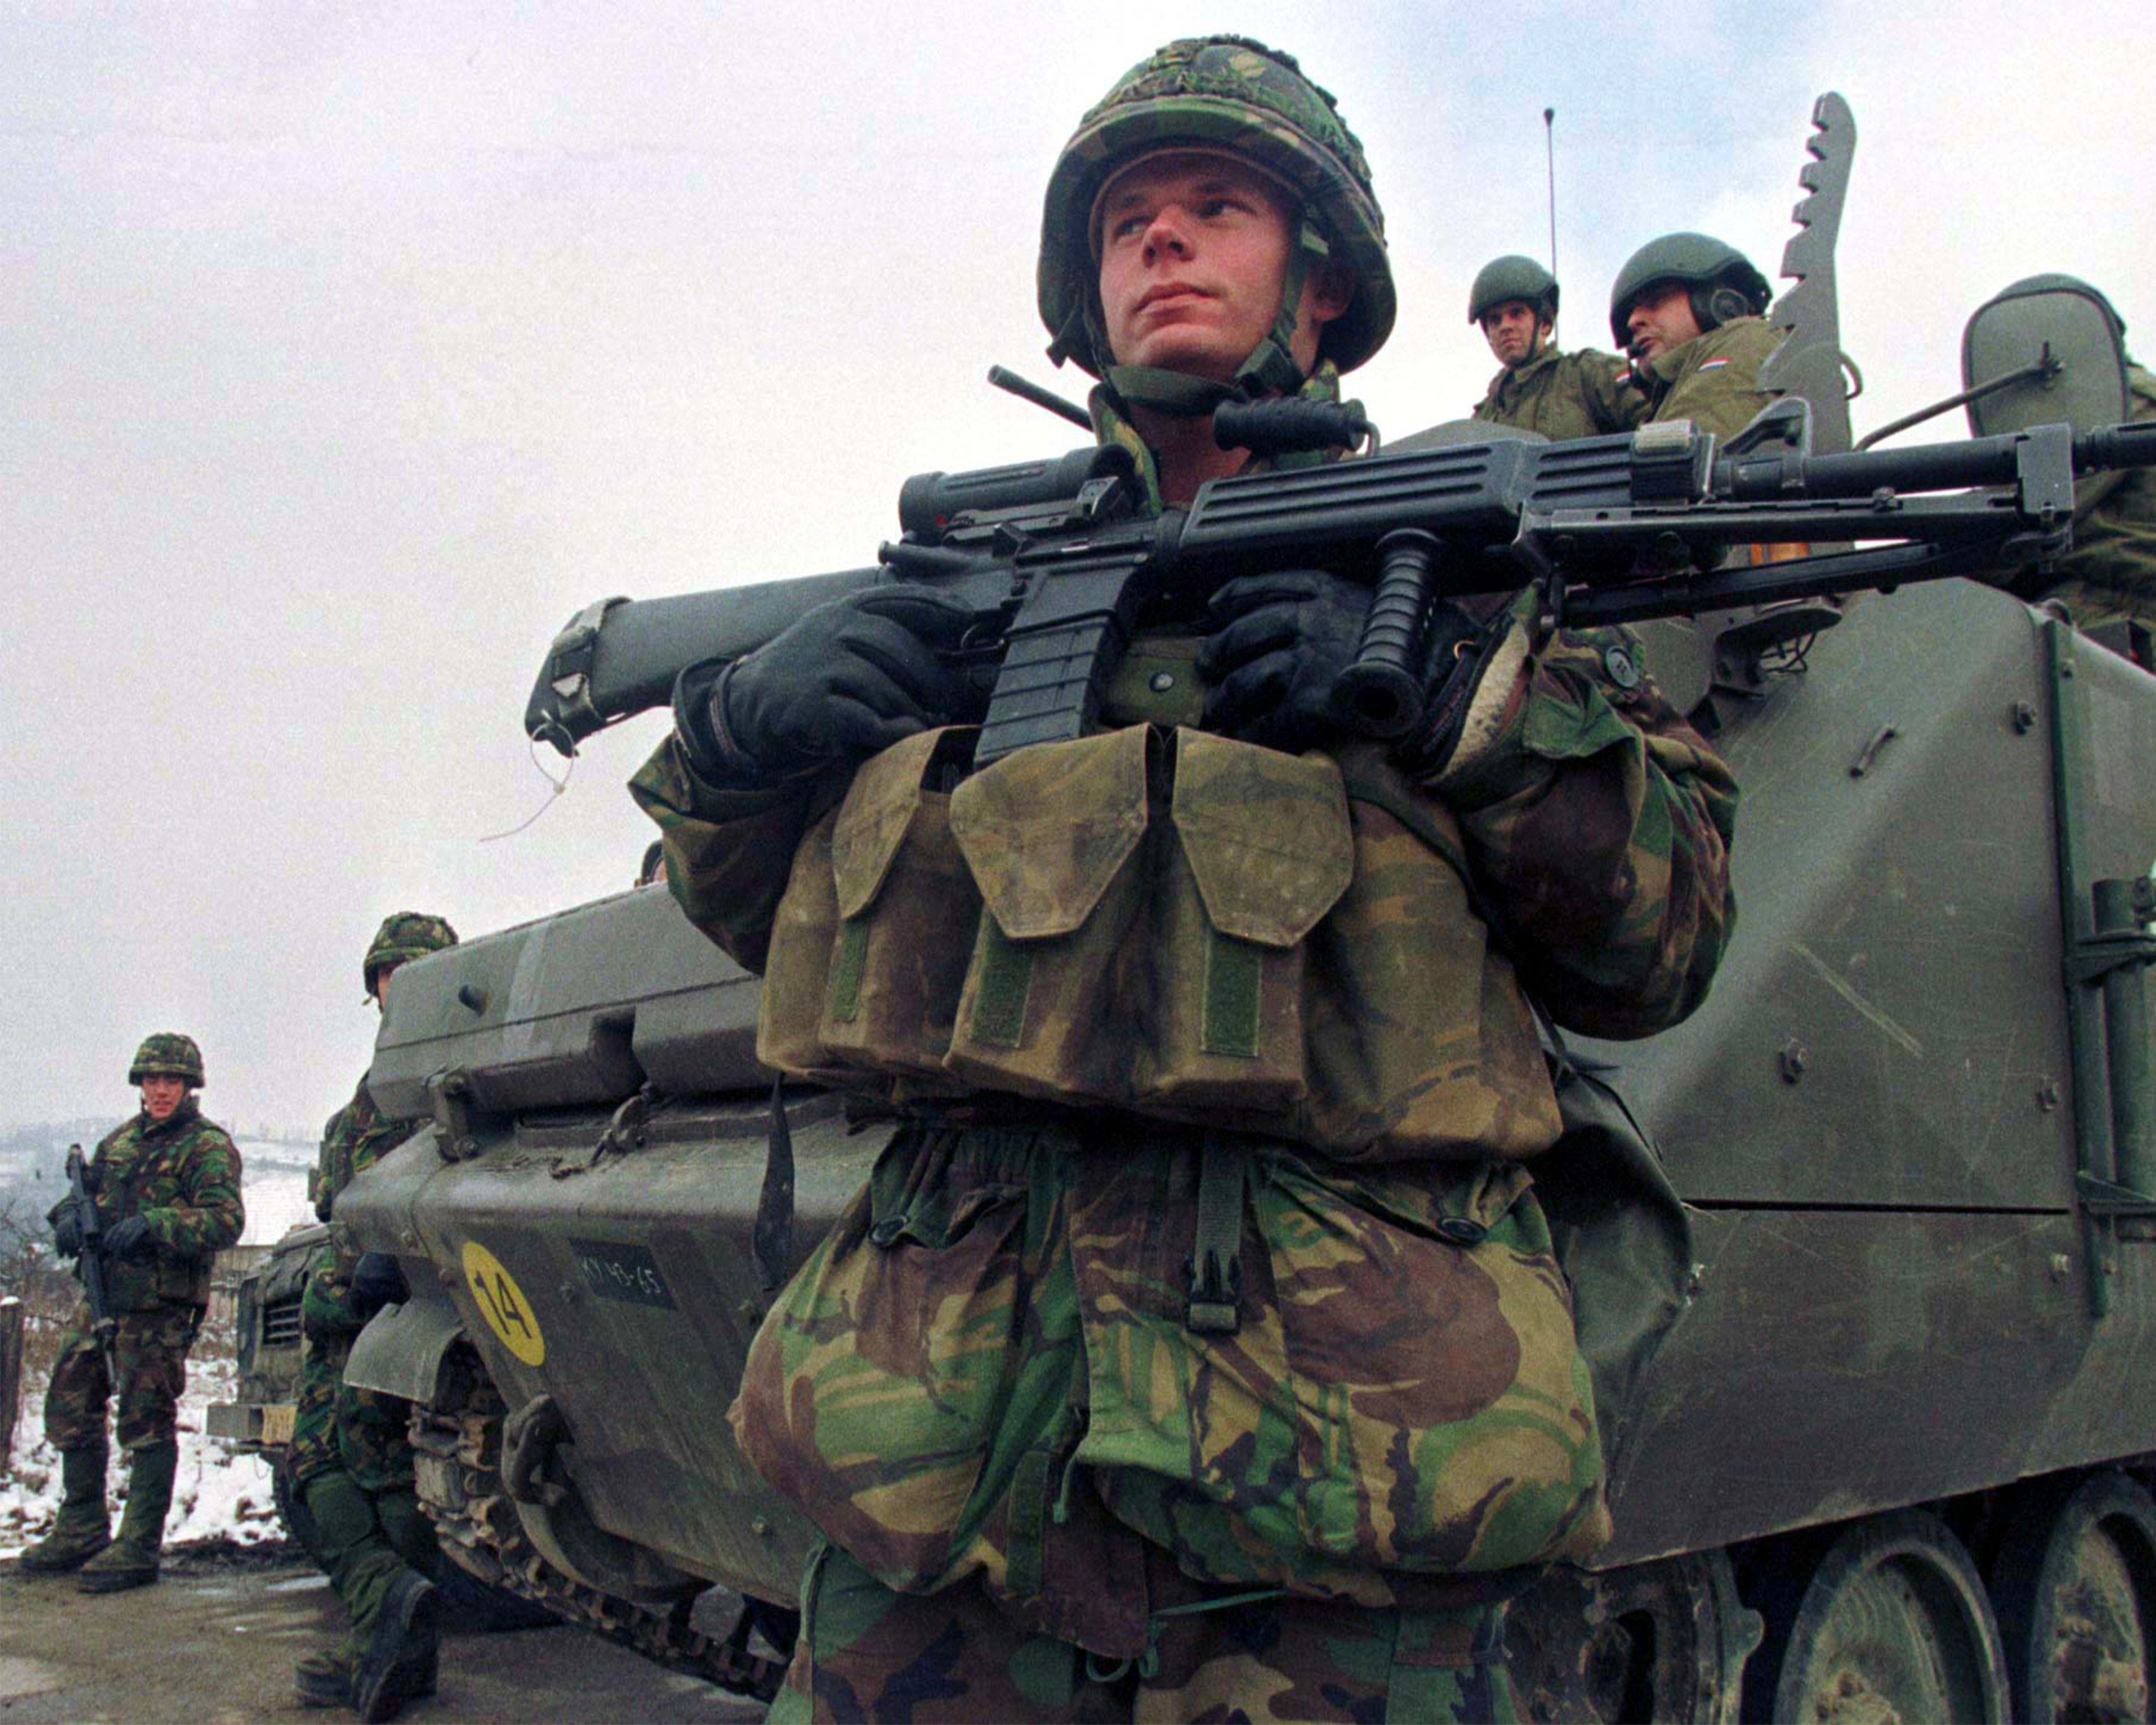 A photo of a Dutch soldier from the NATO-led peacekeeping force in Bosnia standing at a checkpoint in Ahmici, Bosnia on December 18, 1997.